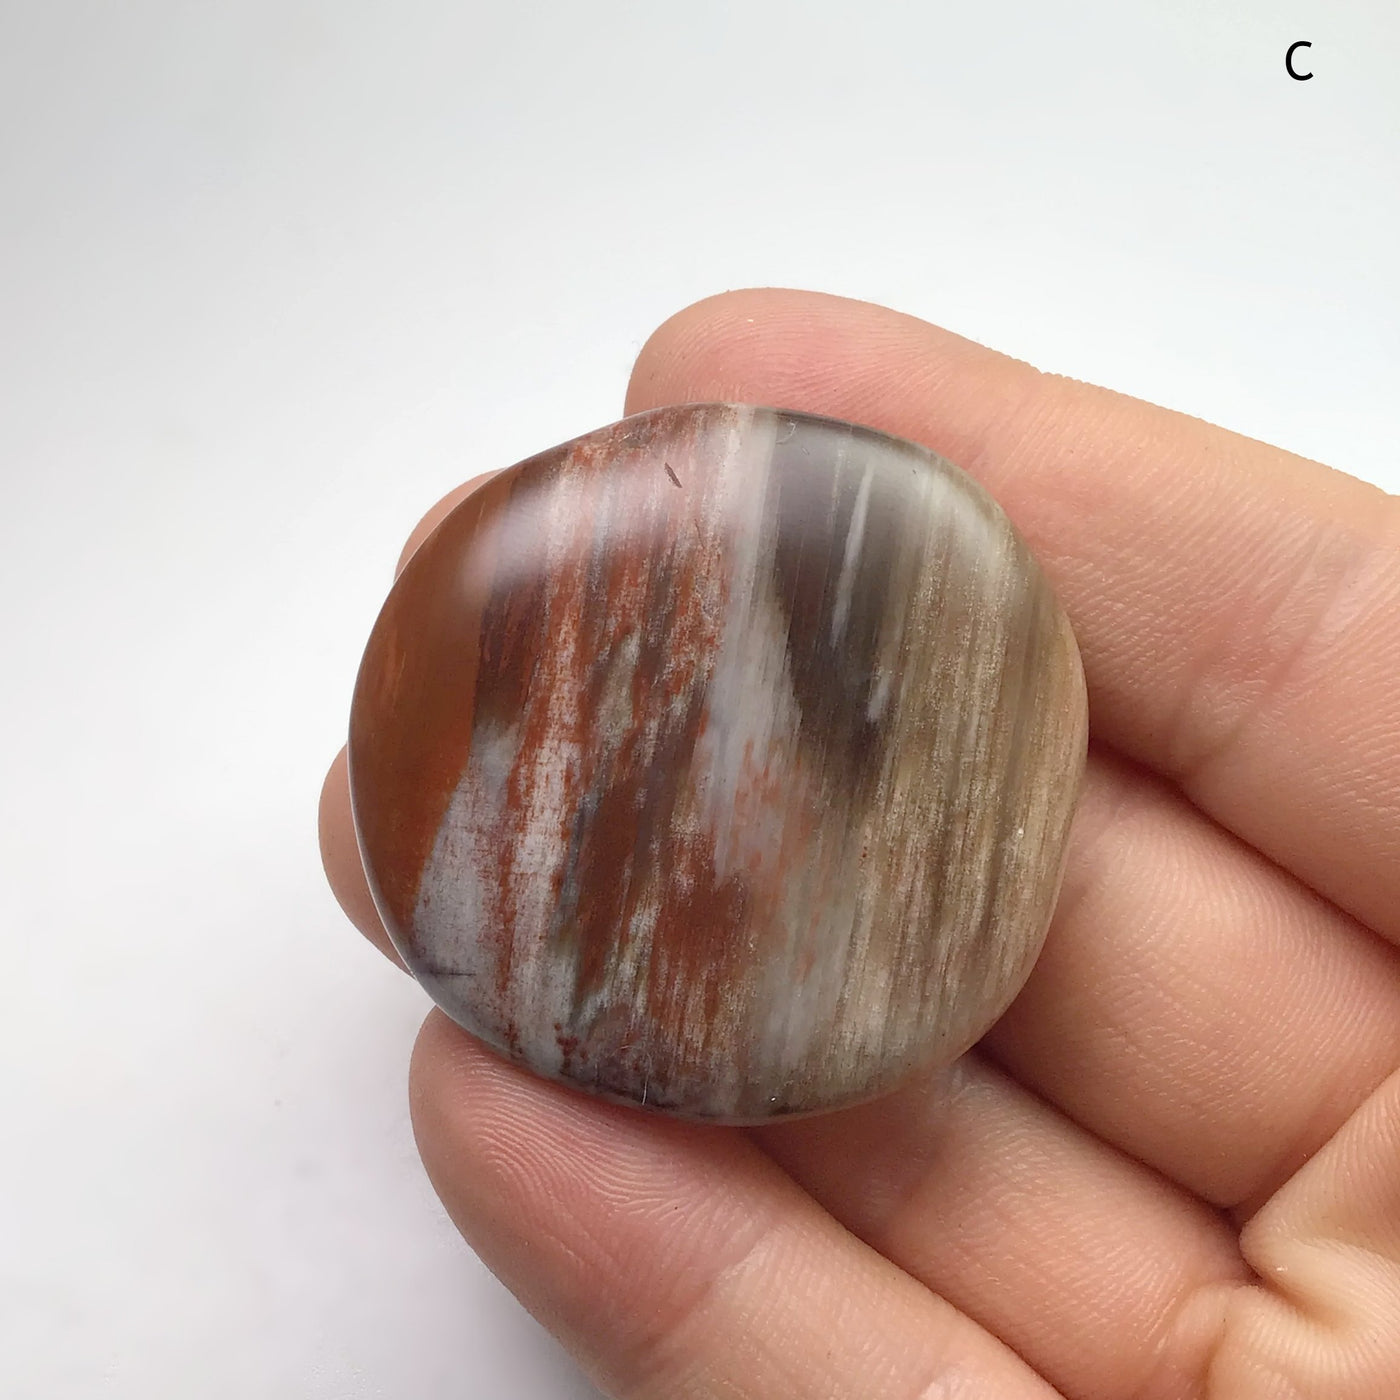 Petrified Wood Touch Stone at $35 Each